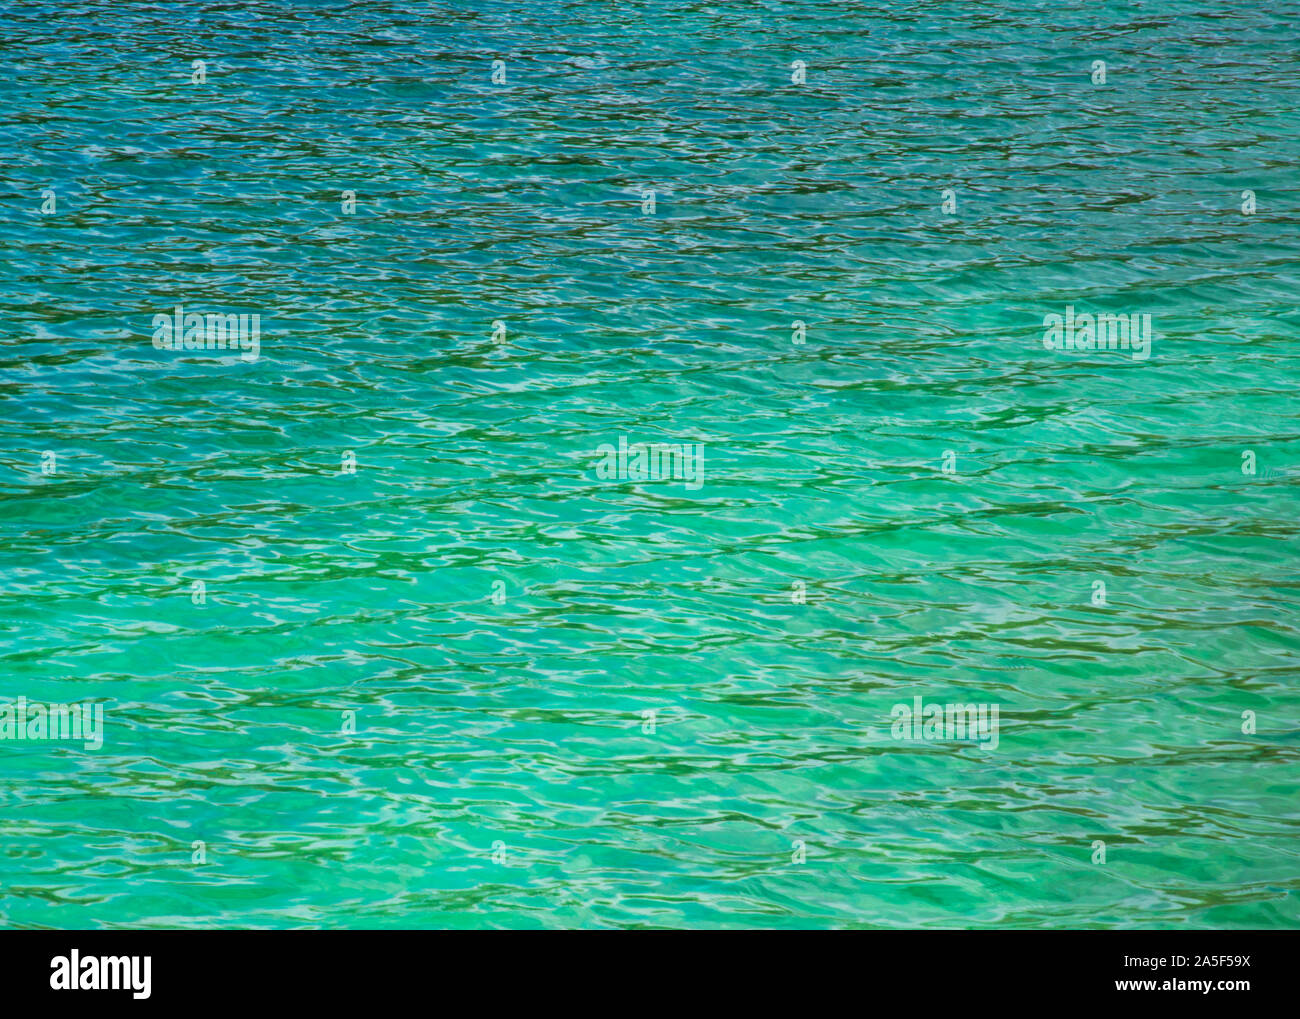 Water background Stock Photo